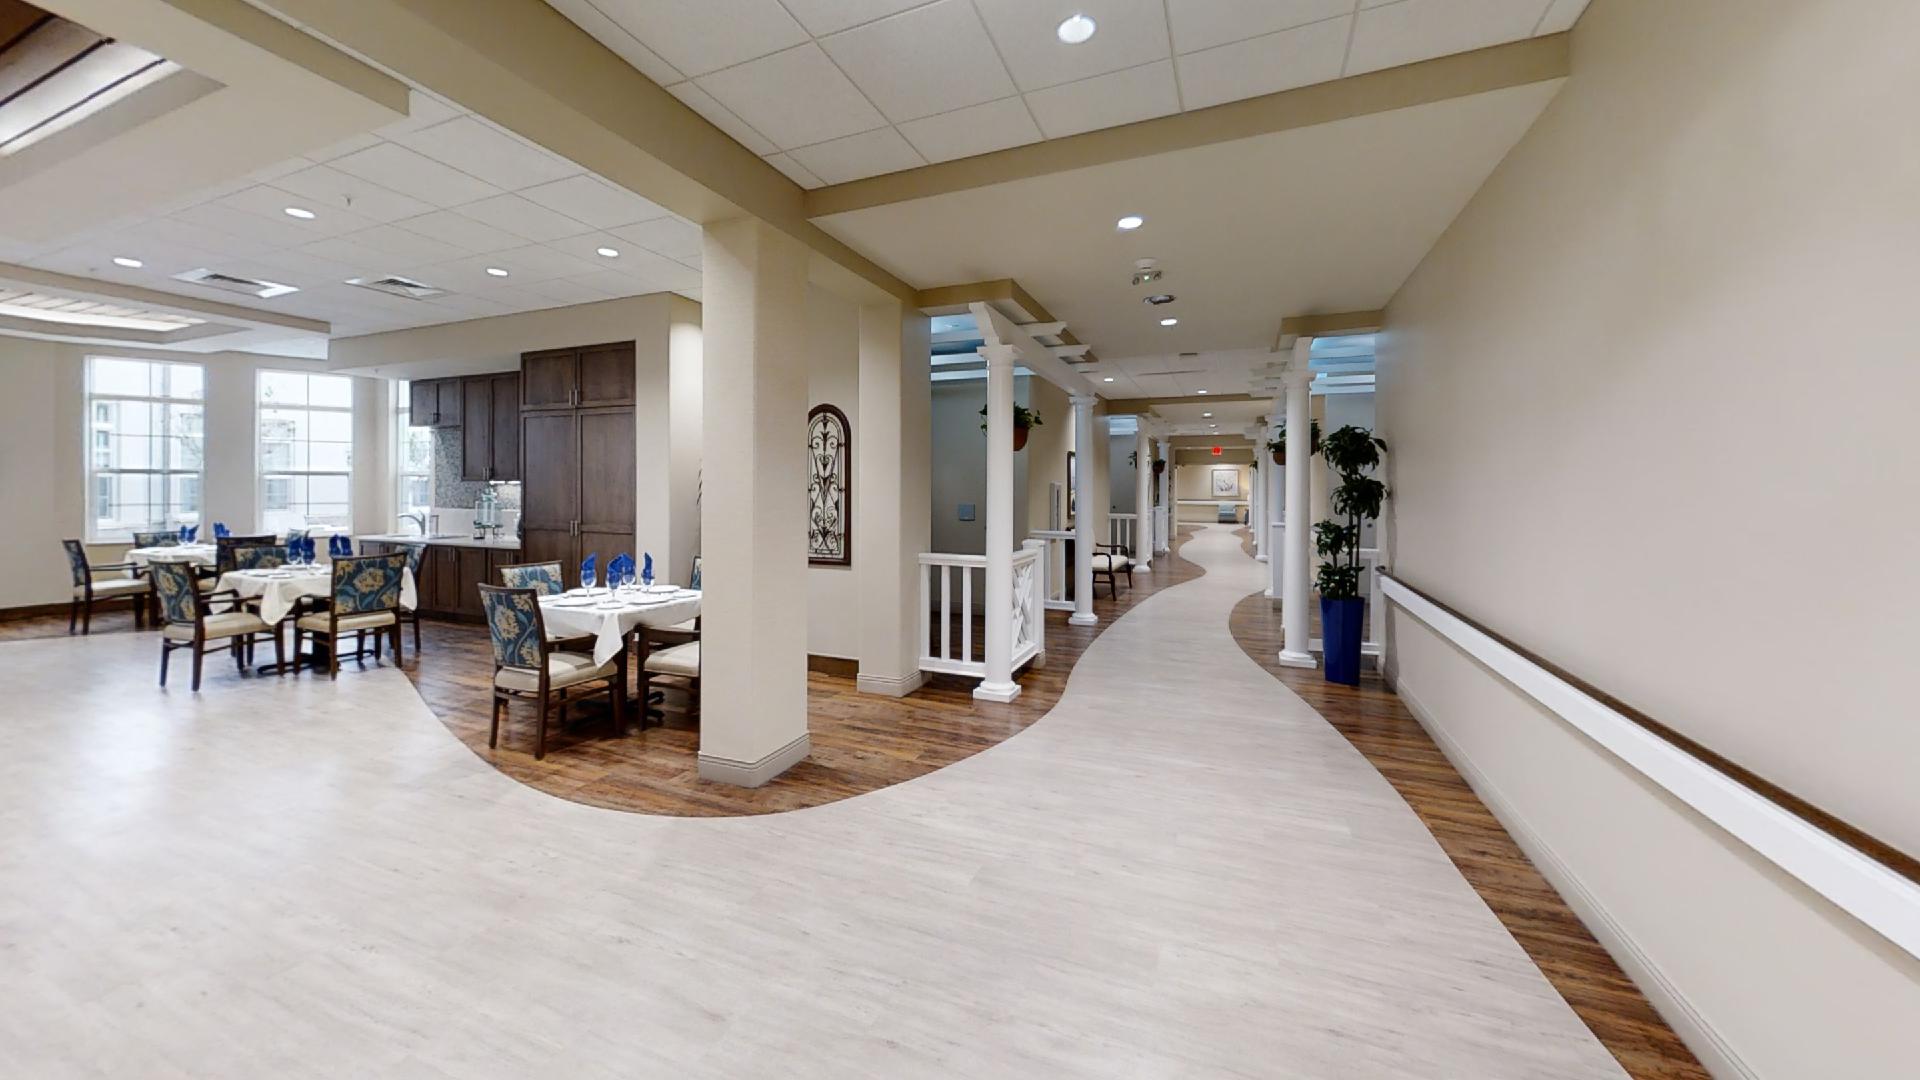 Aravilla Clearwater Memory Care Community - Lobby